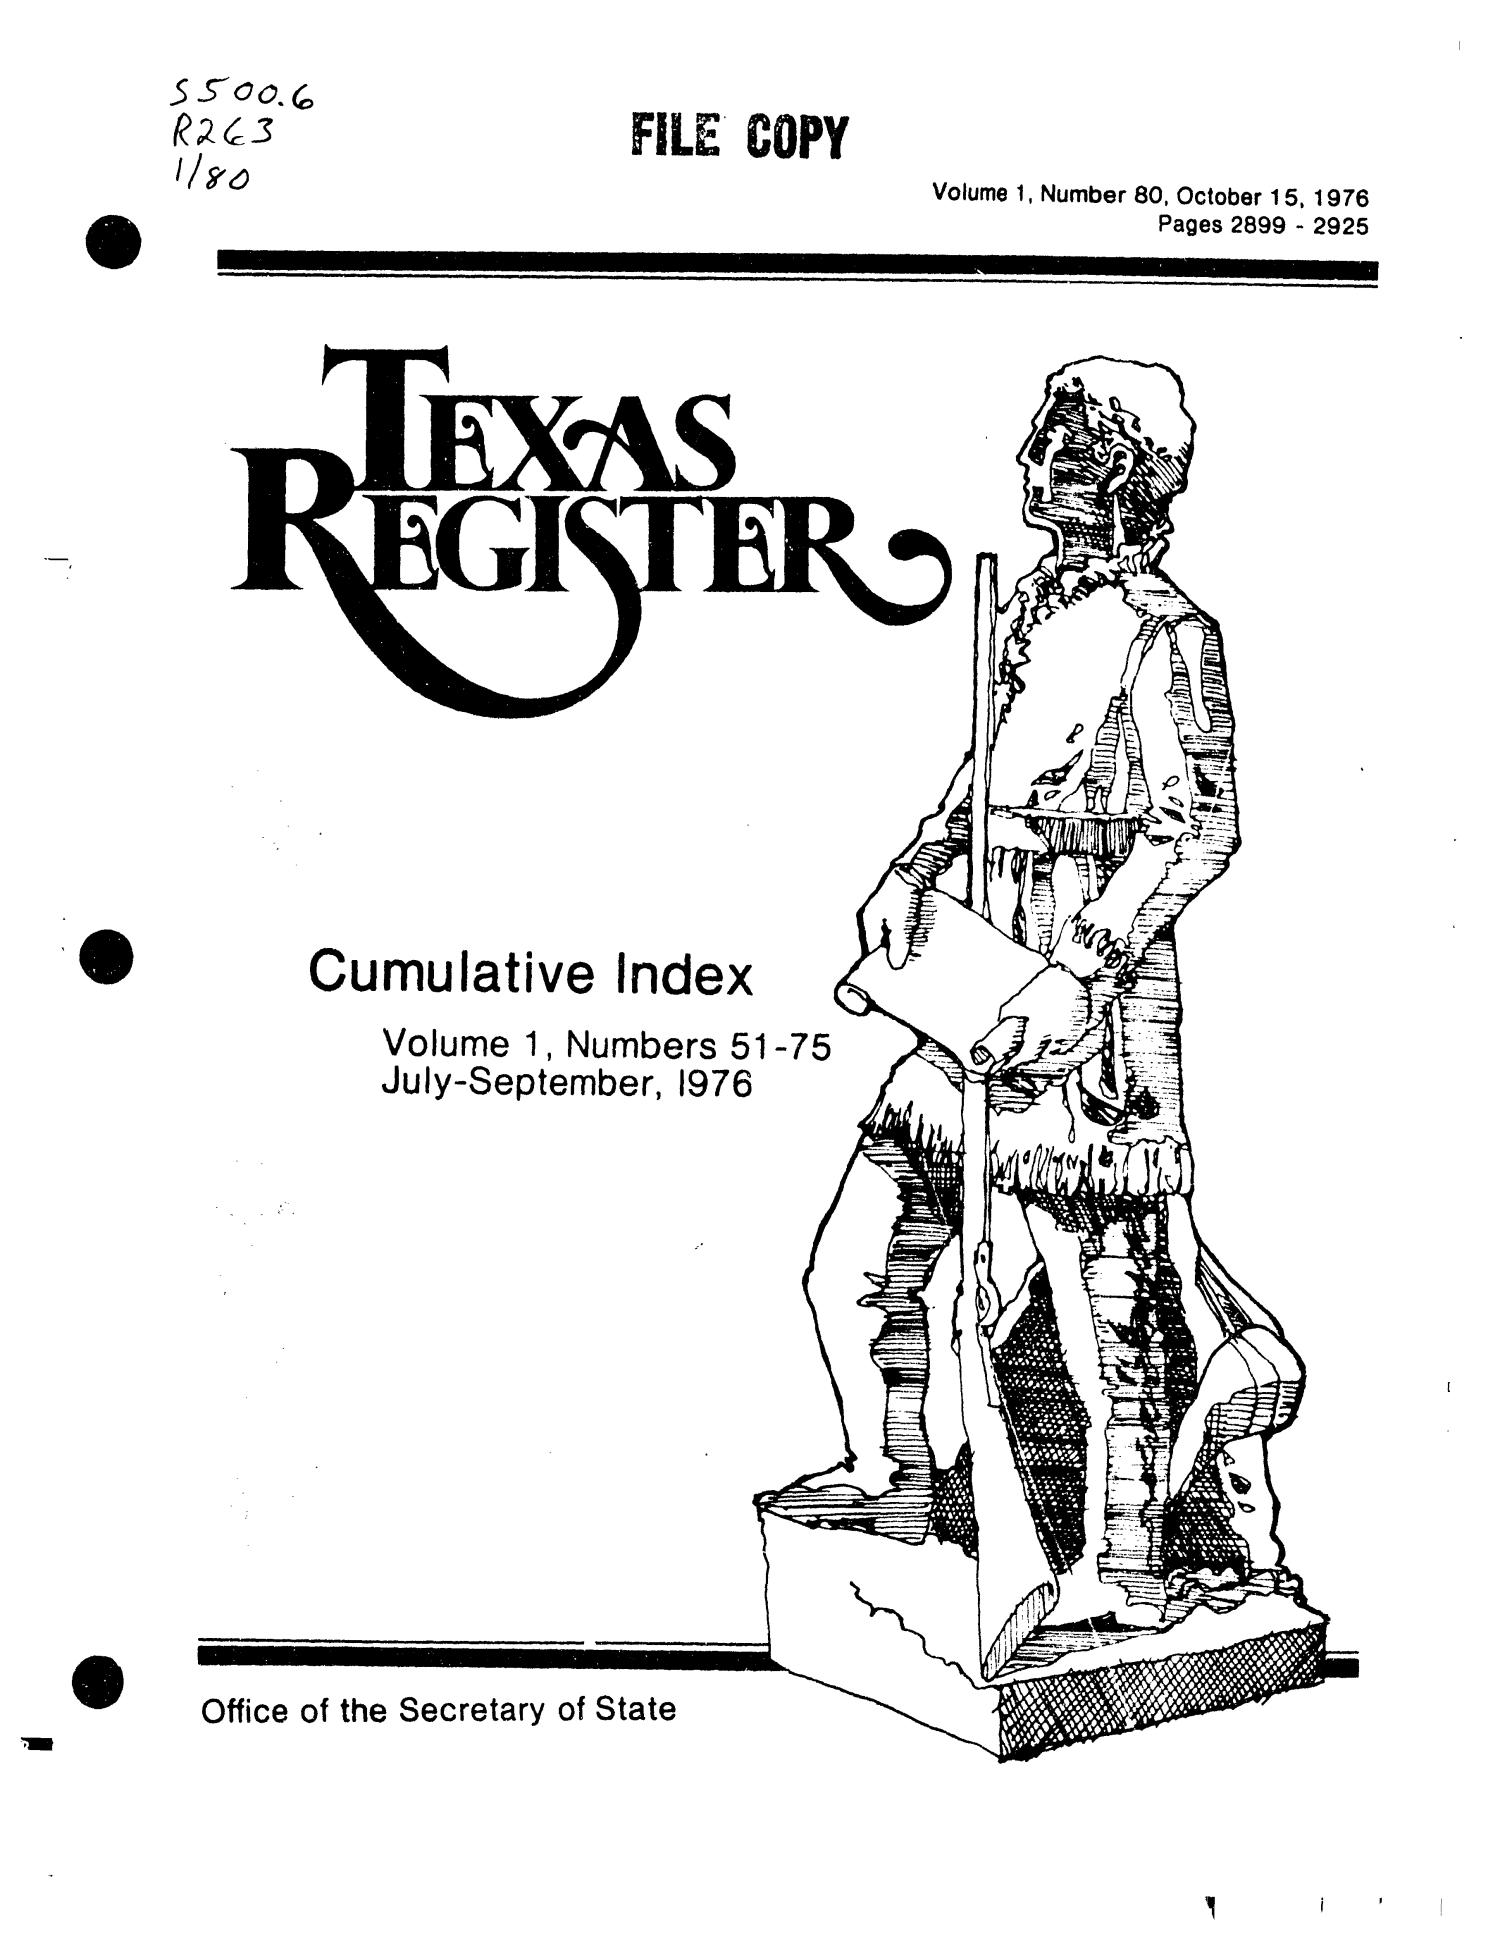 Texas Register, Volume 1, Number 80, Pages 2899-2925, October 15, 1976
                                                
                                                    Title Page
                                                